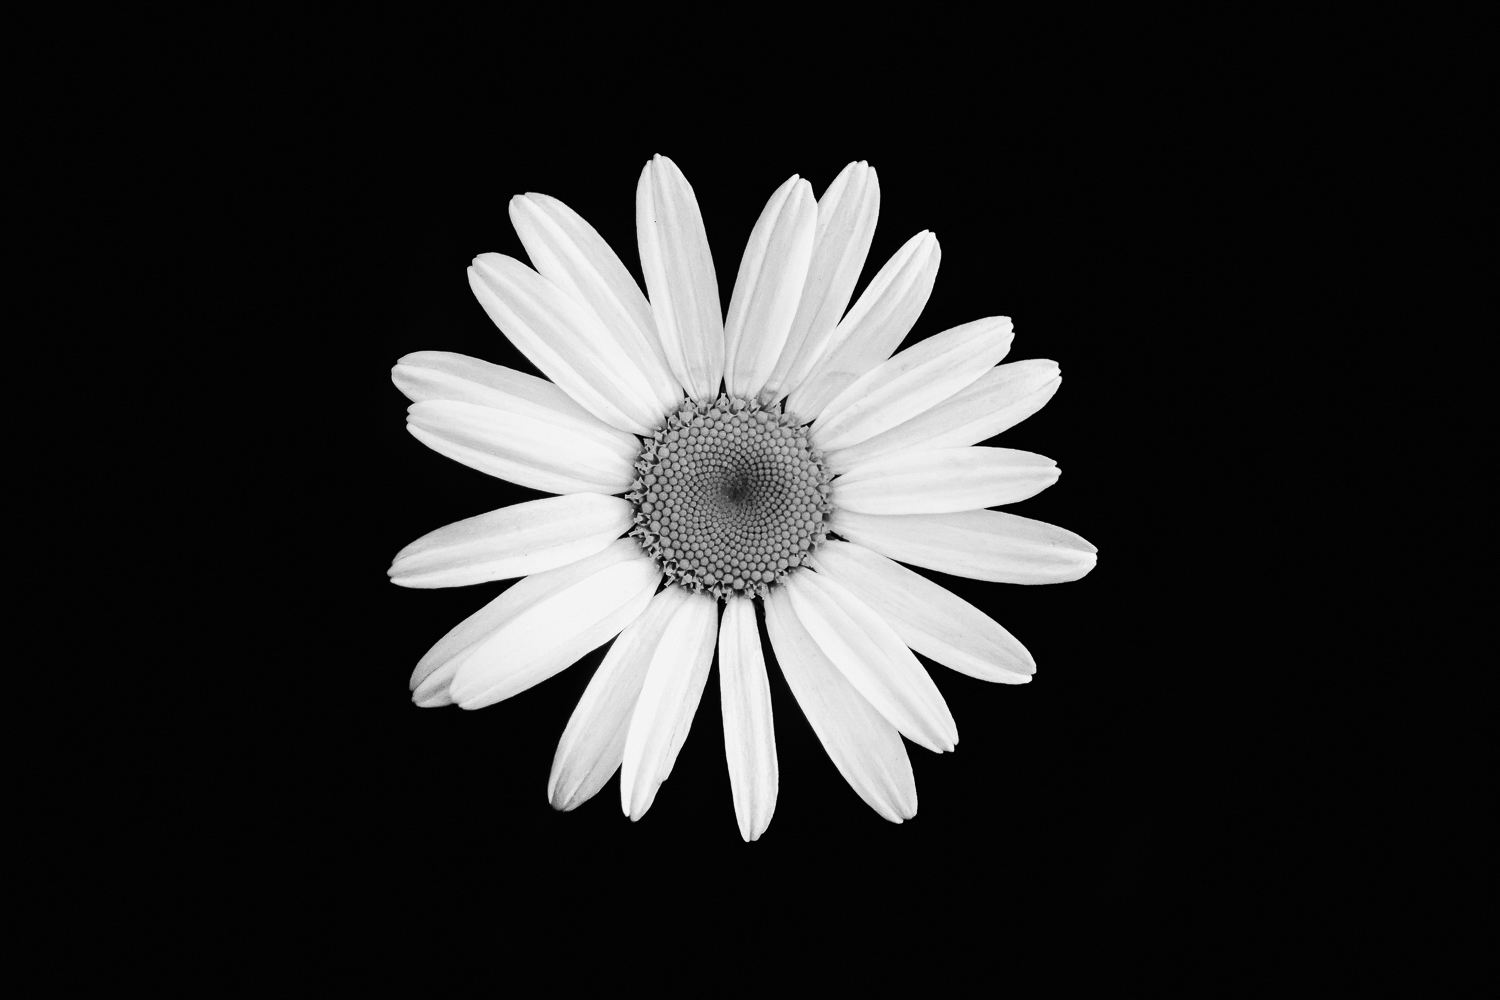 A white daisy on a black background in black & white